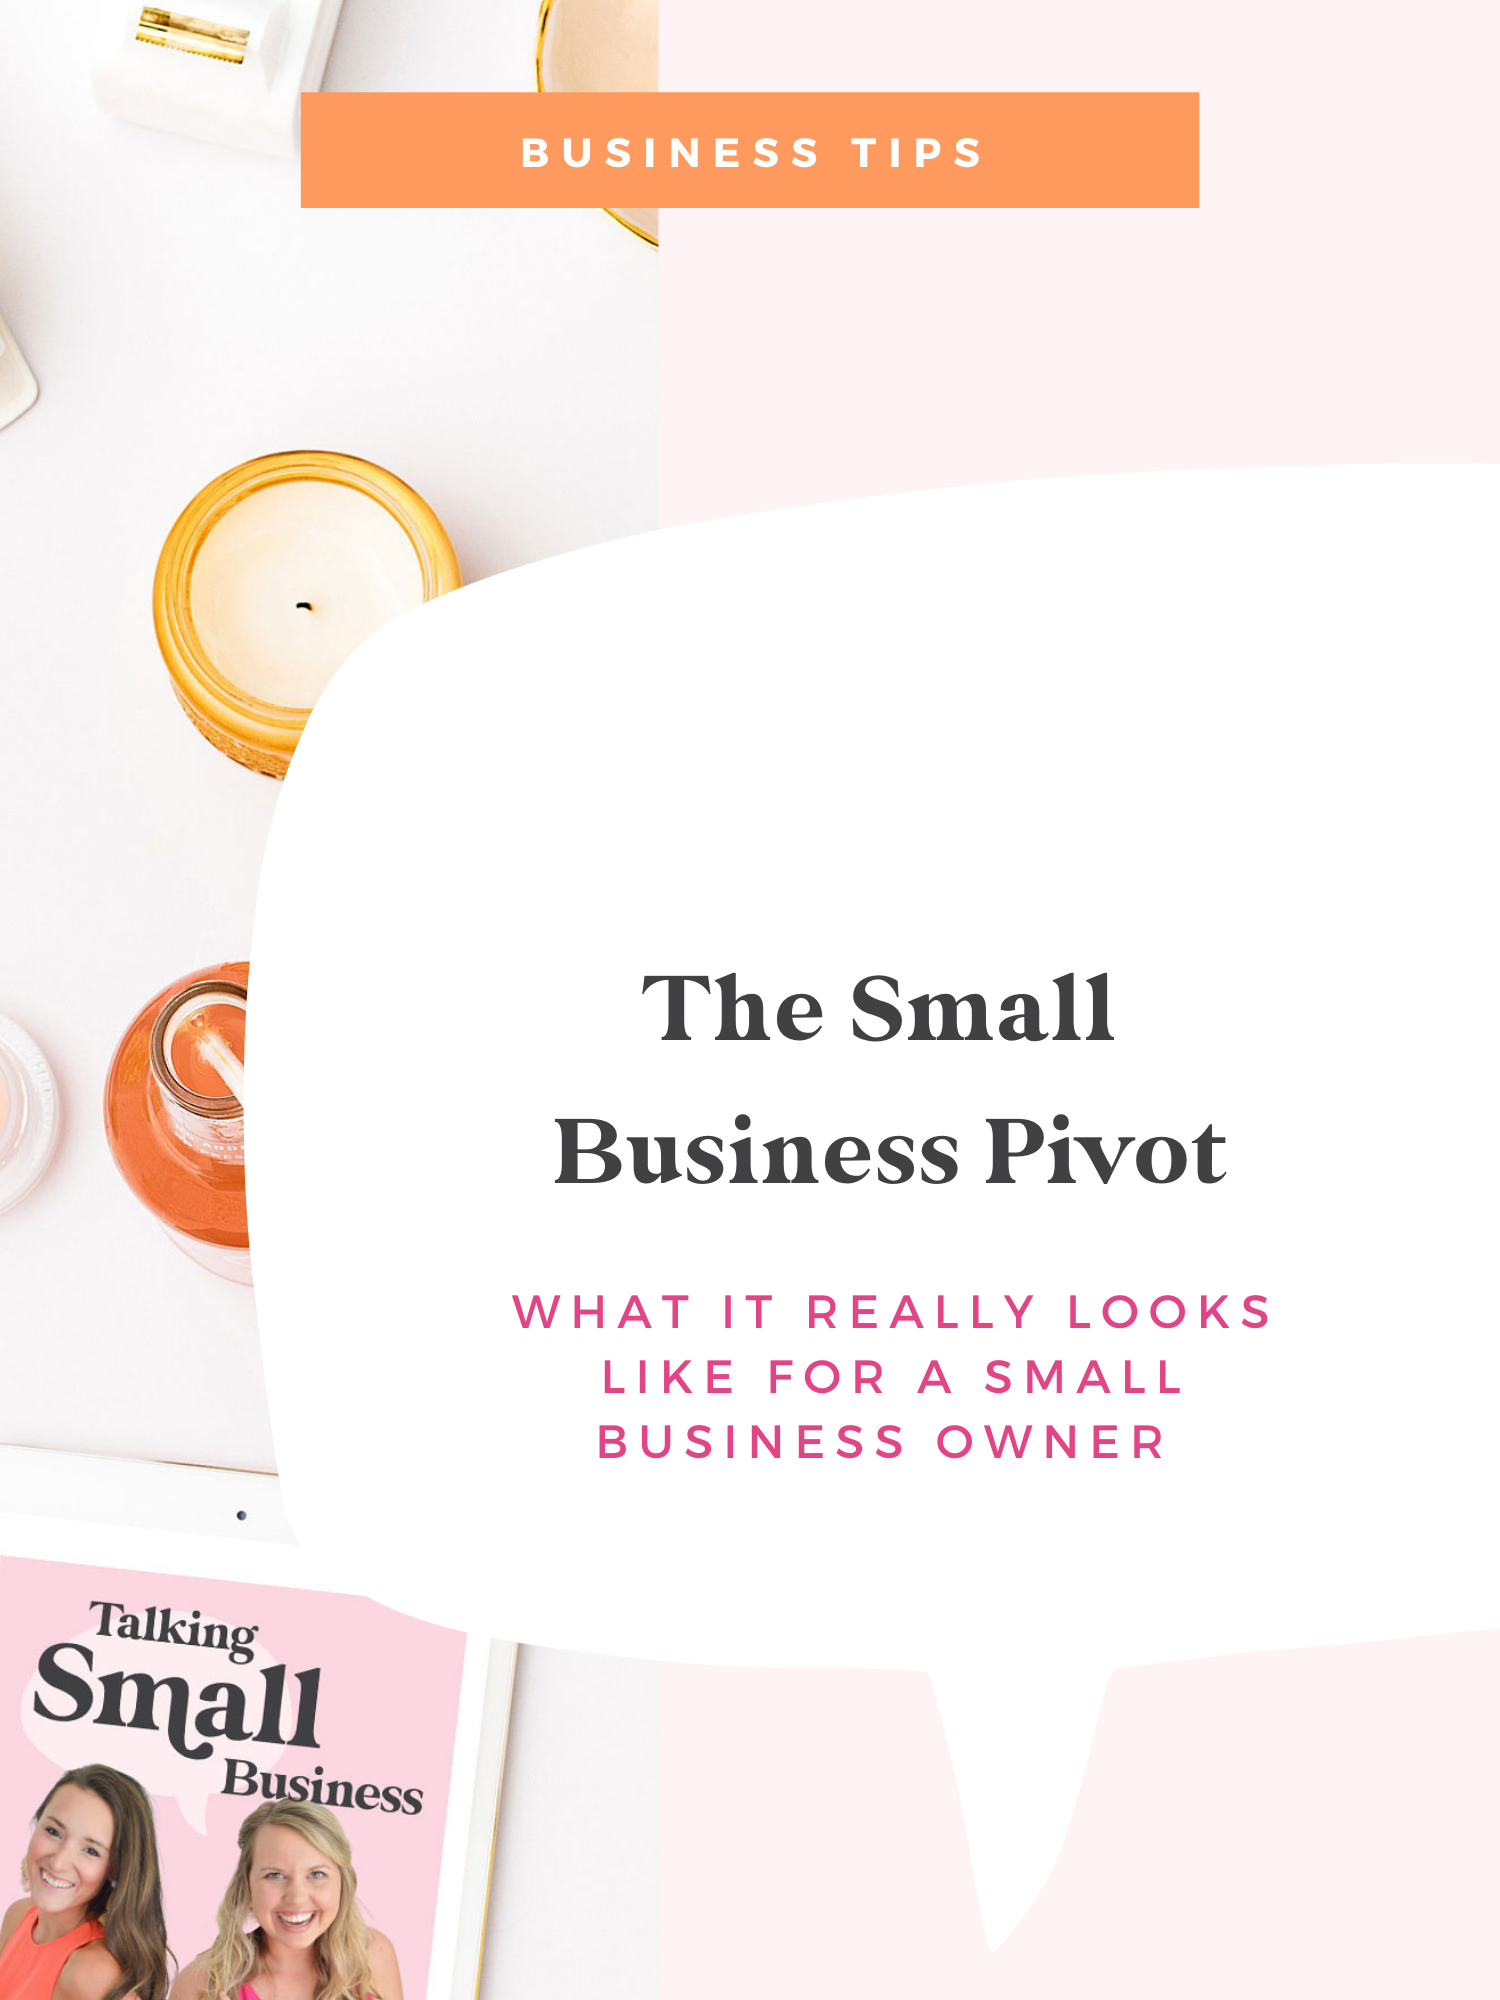 Pivoting as a small business owner